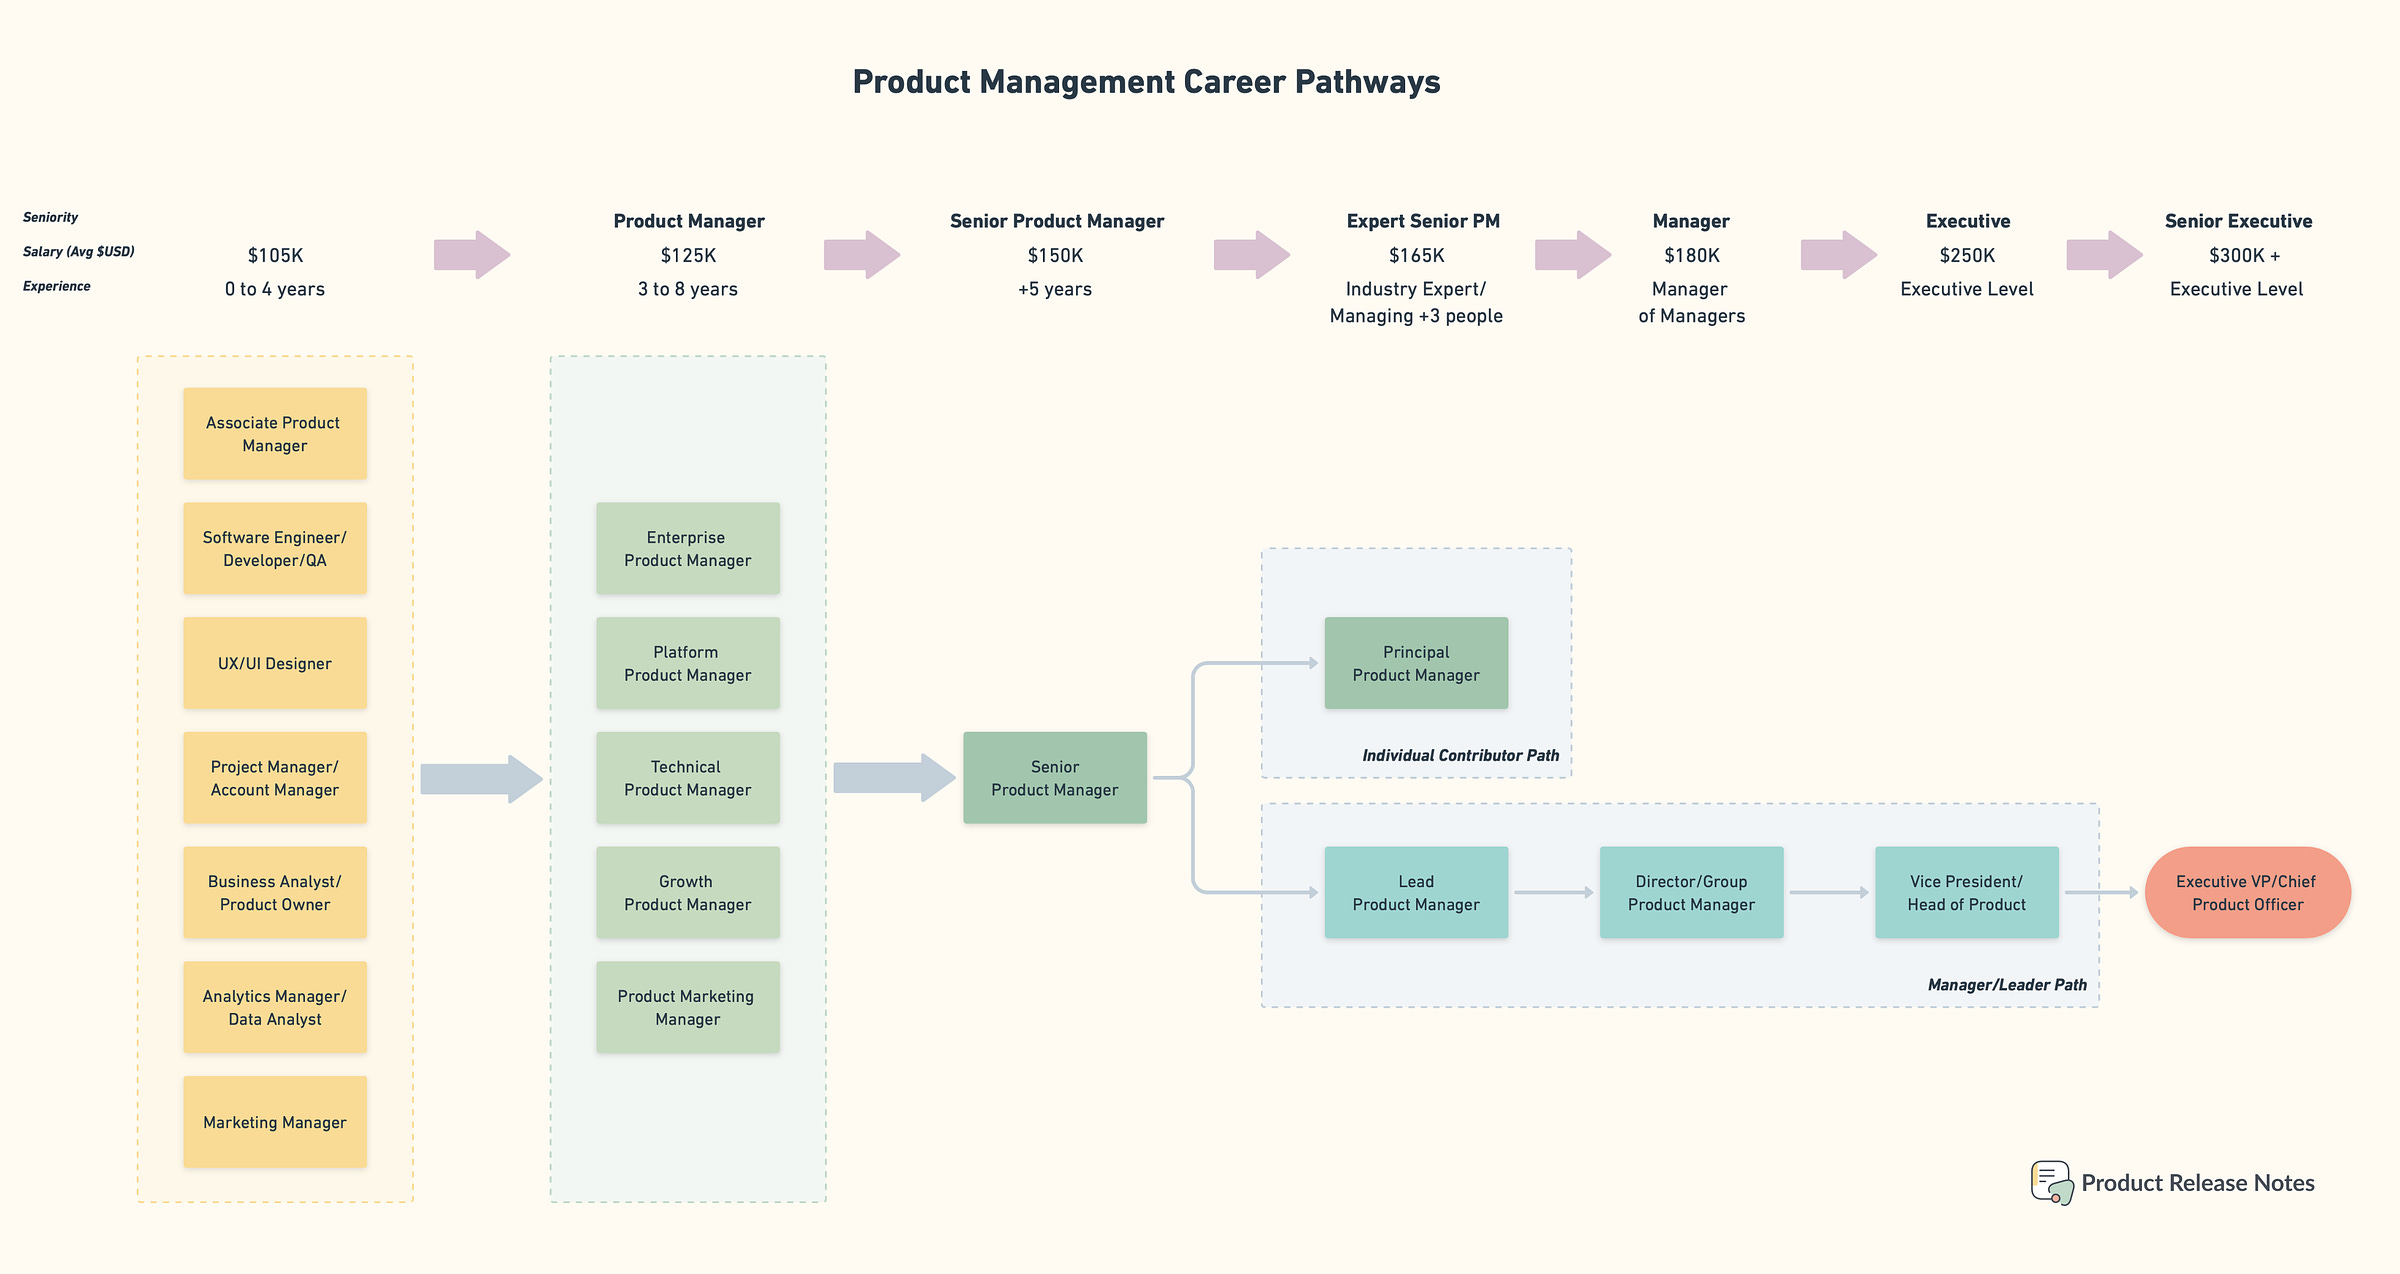 Typical career pathways in Product Management by Product Release Notes